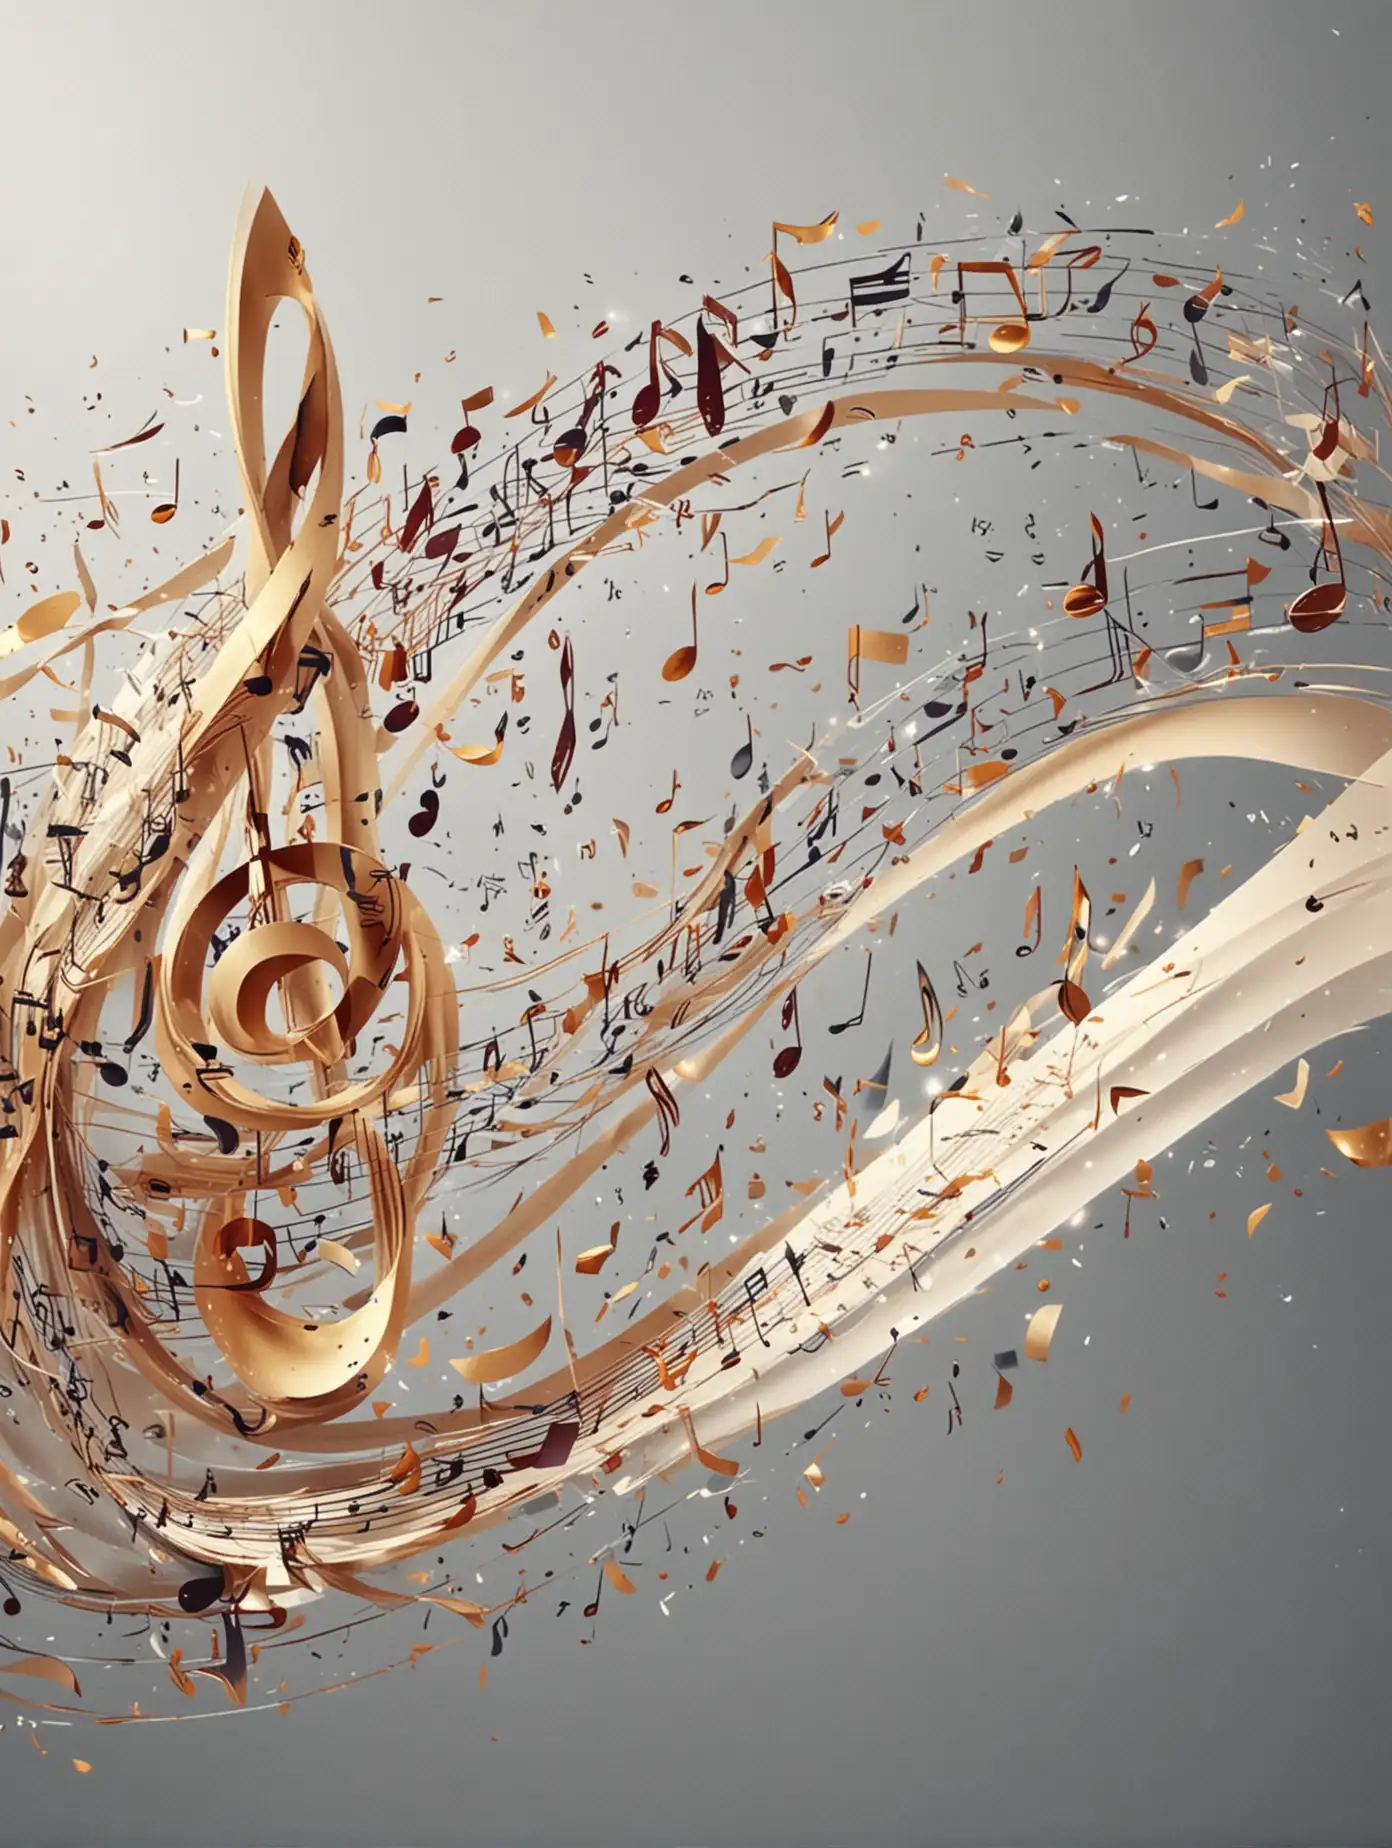 Abstract Music Notes Background with Flowing Lines and Staff